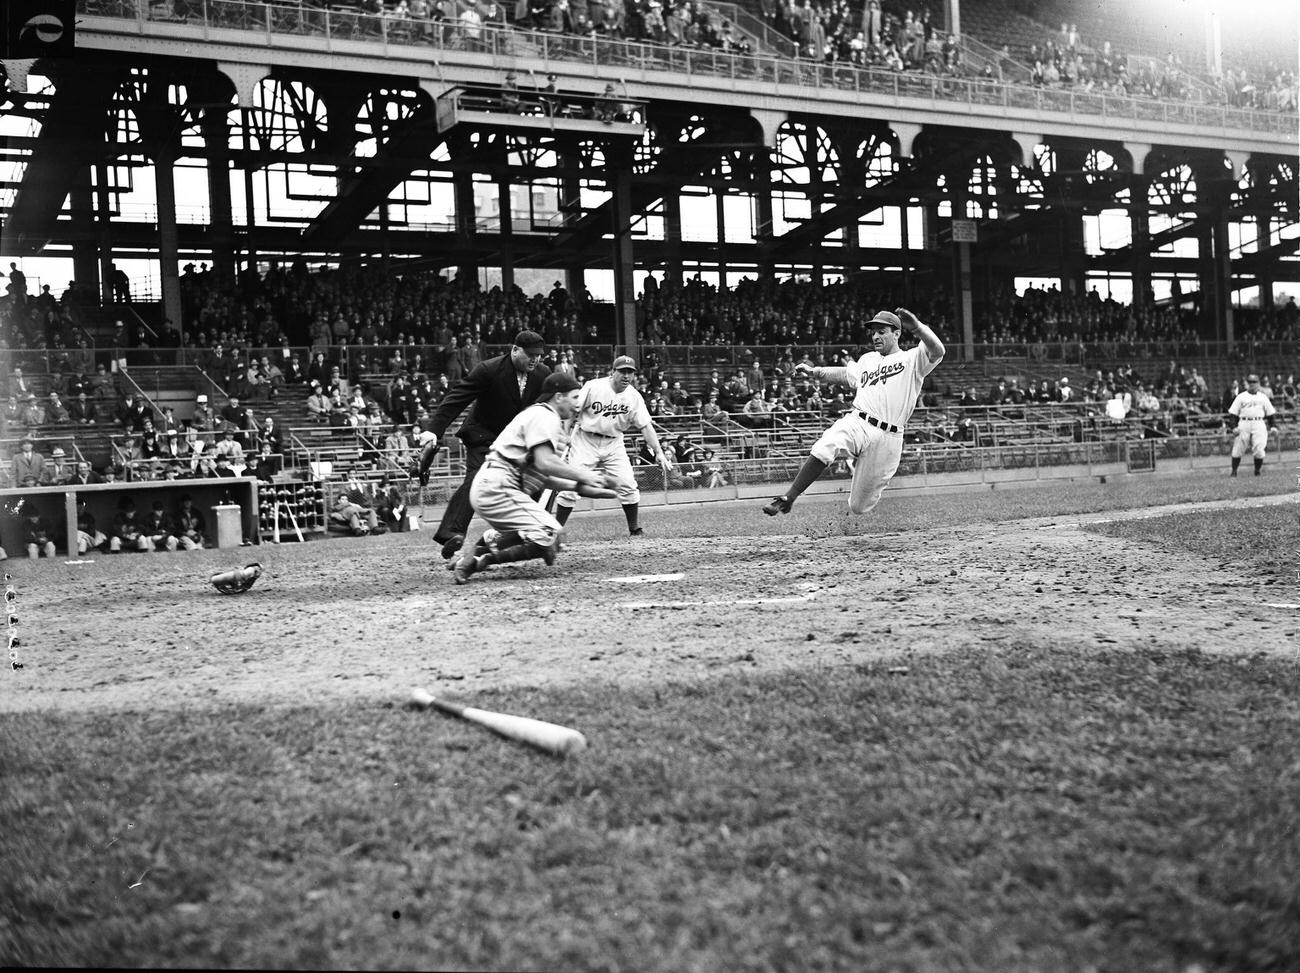 Brooklyn Dodgers Player Jumping Towards Home Plate At Ebbets Field, Brooklyn, 1940S